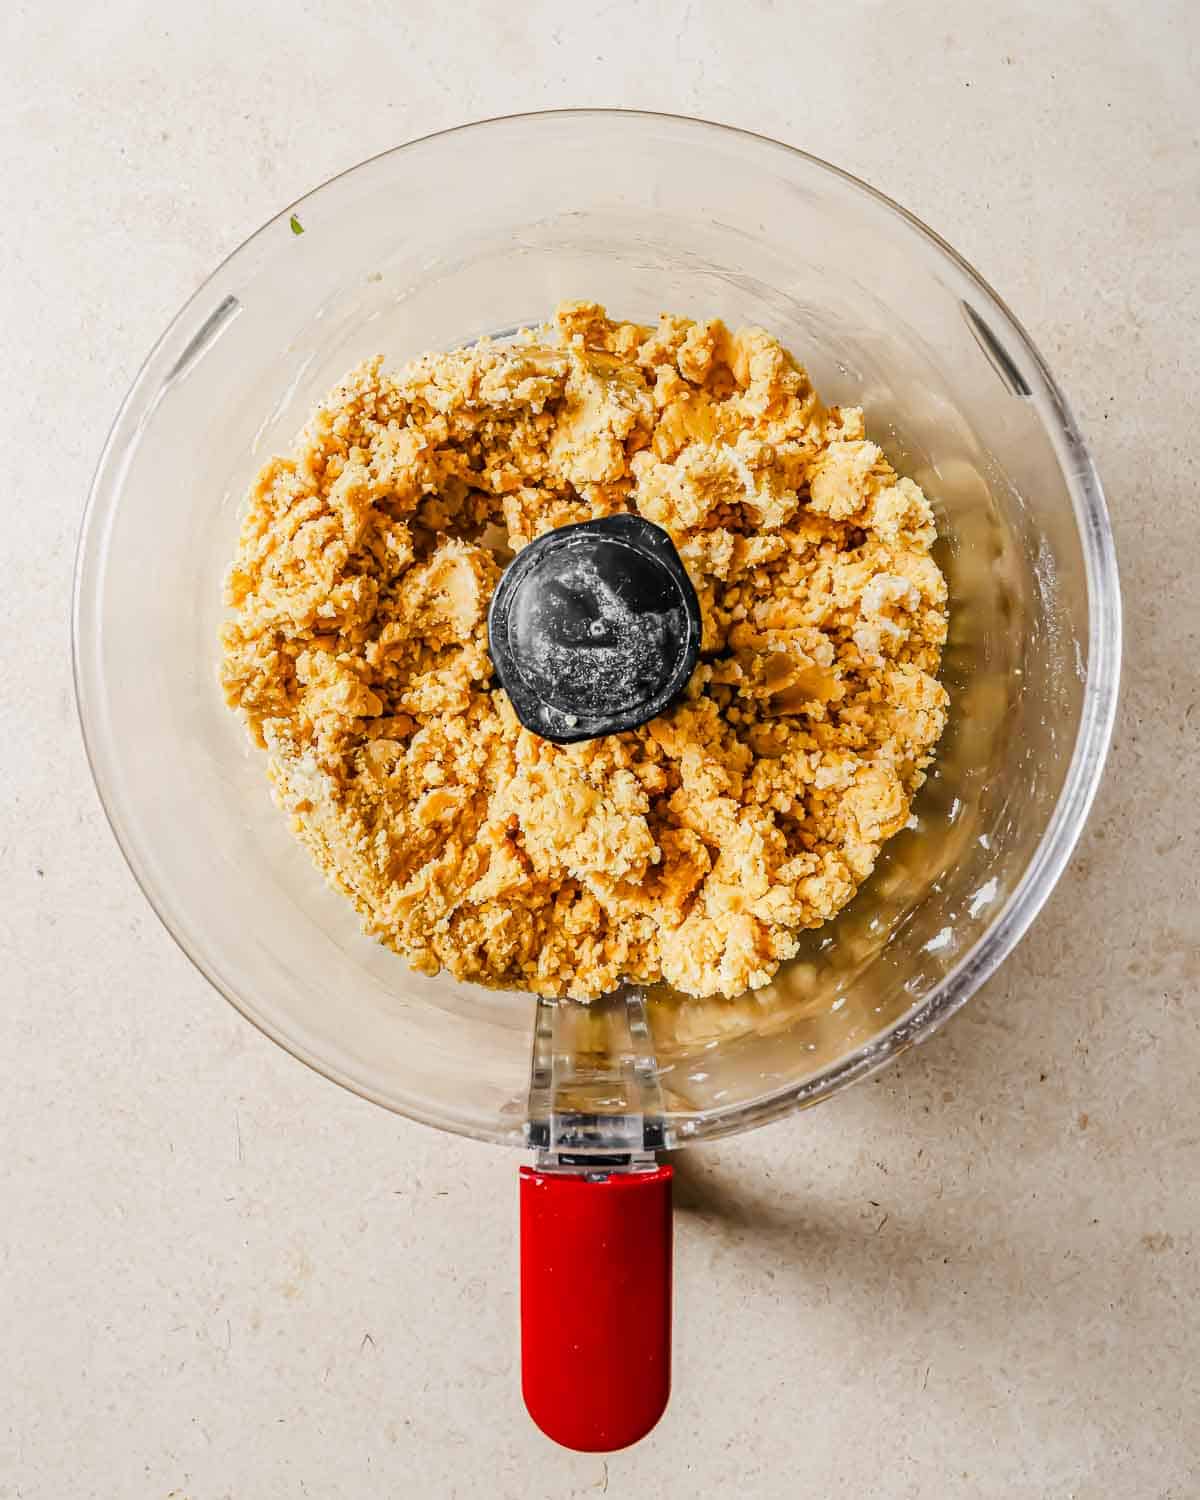 A glass food processor bowl with a red handle, containing a mixture of crumbled dough on a light surface.